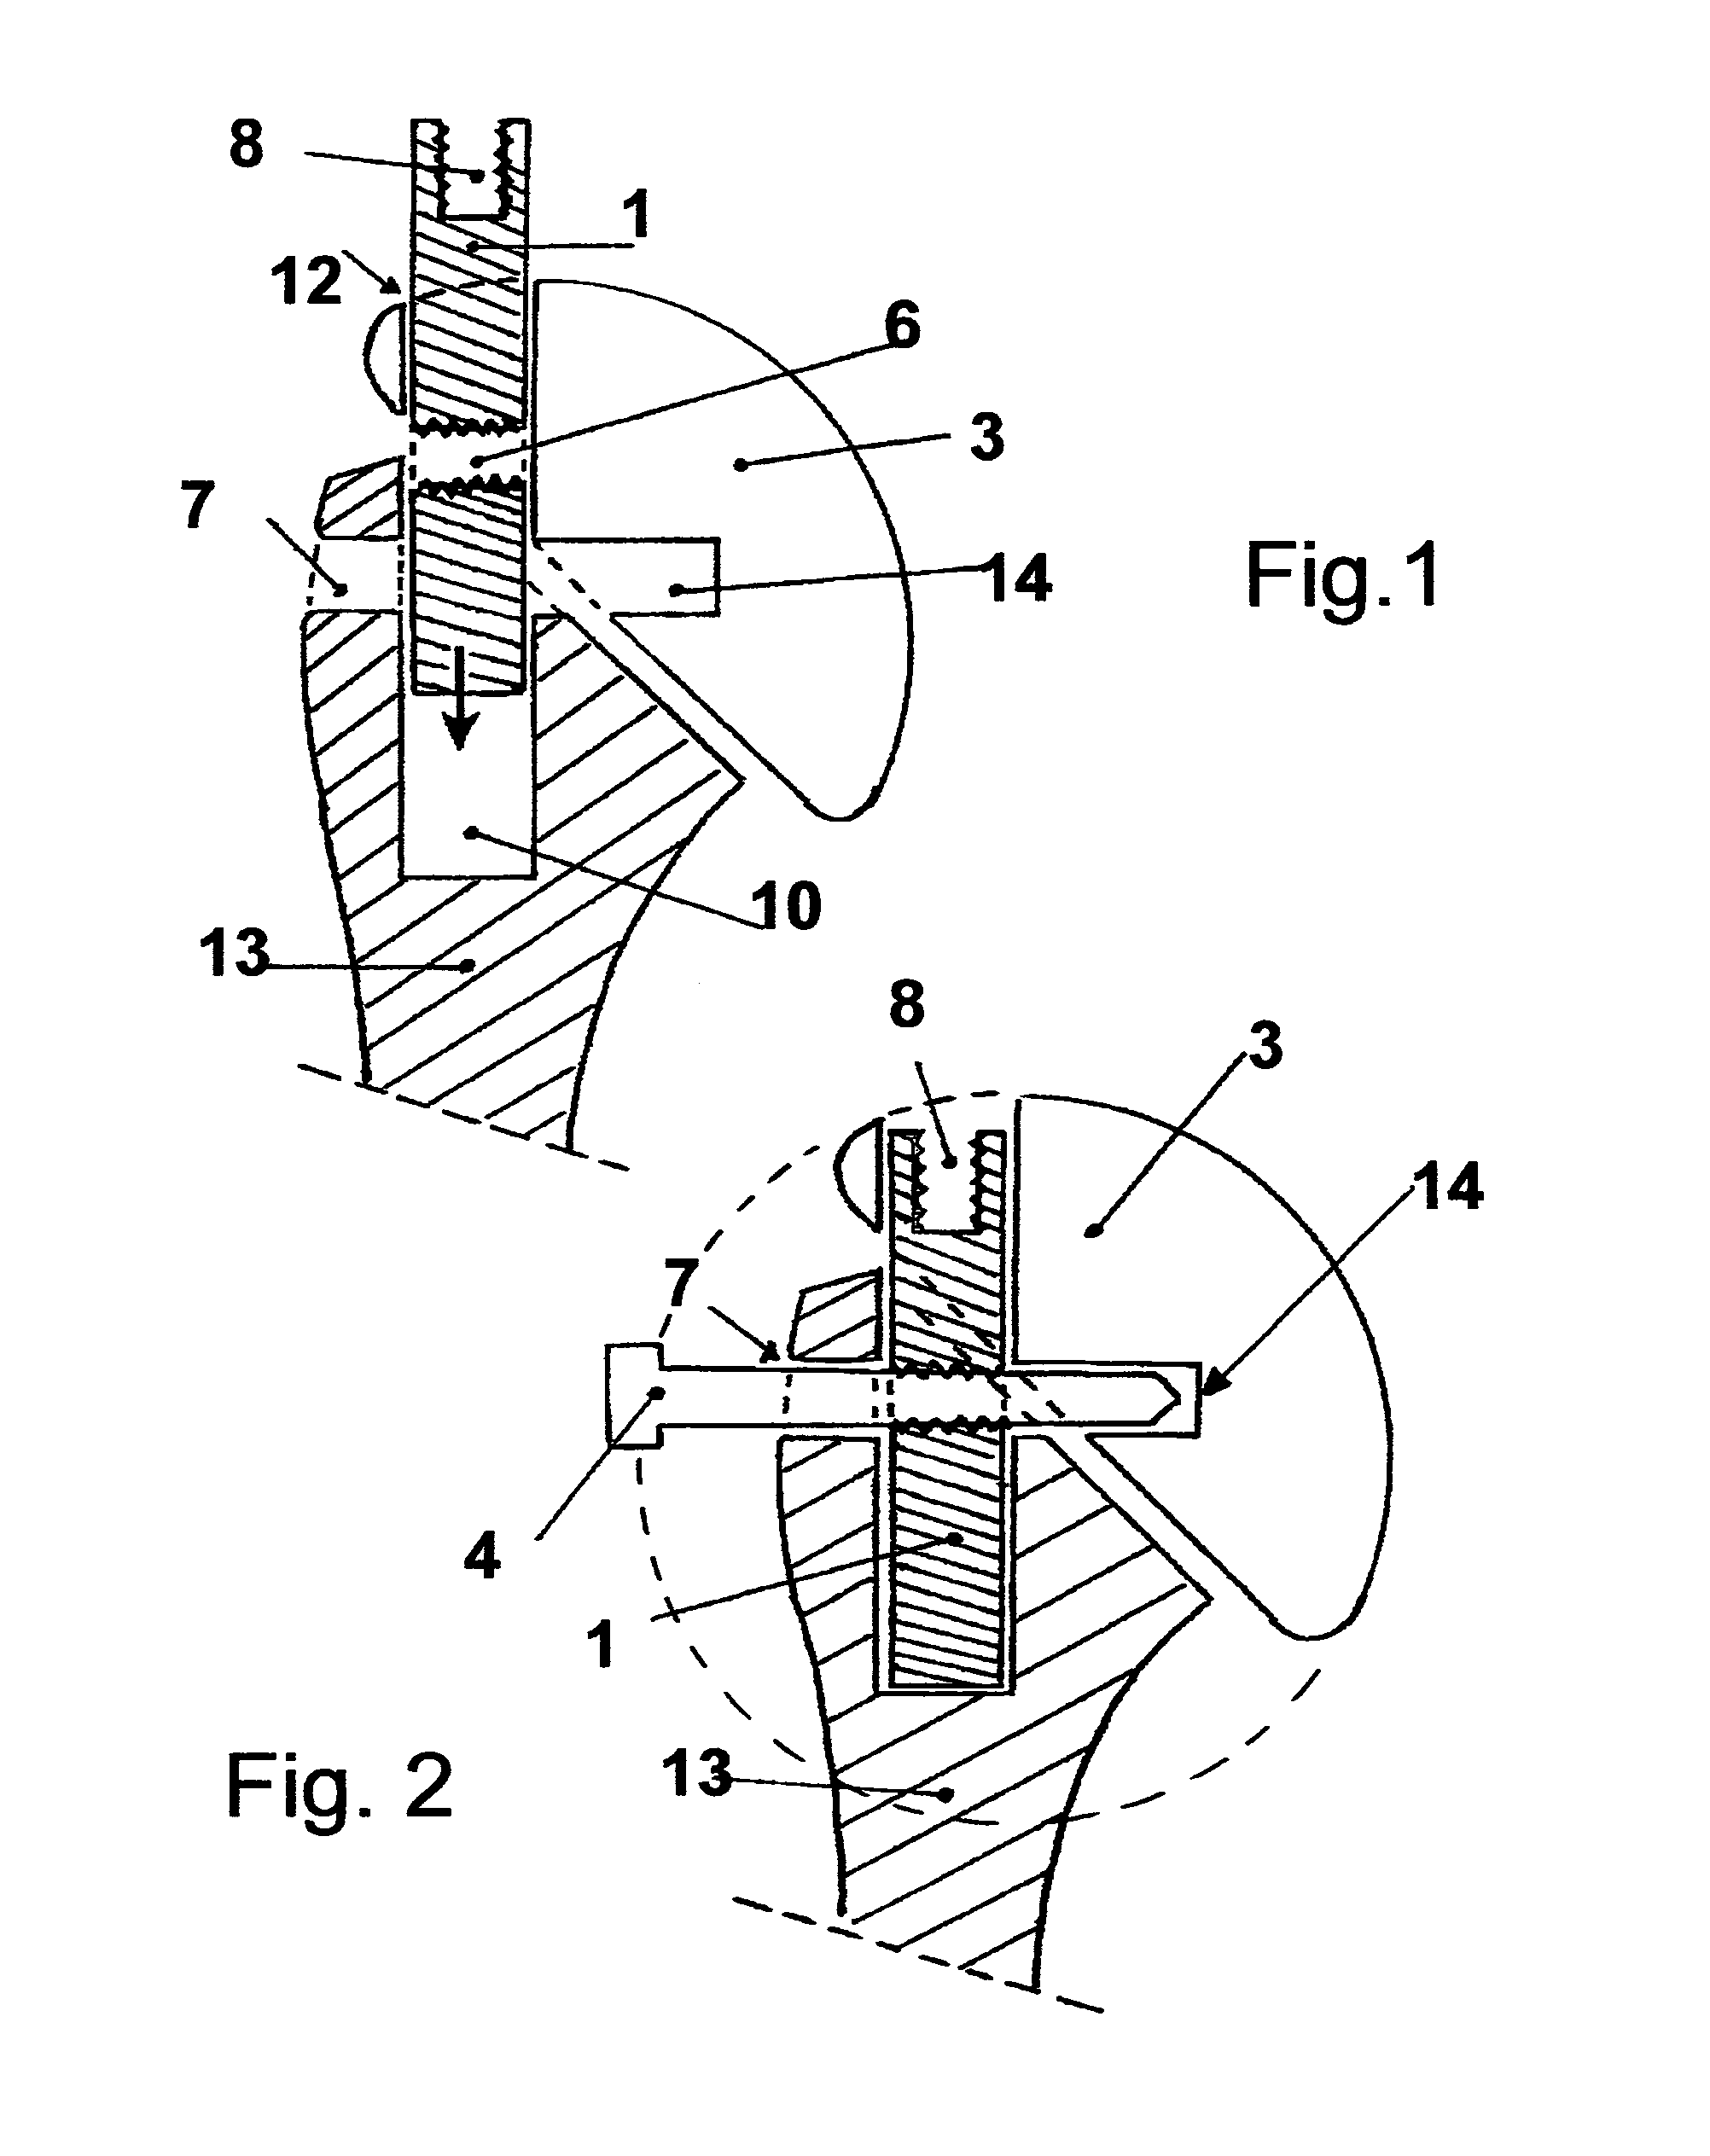 Shoulder prosthesis with insert for locking screws